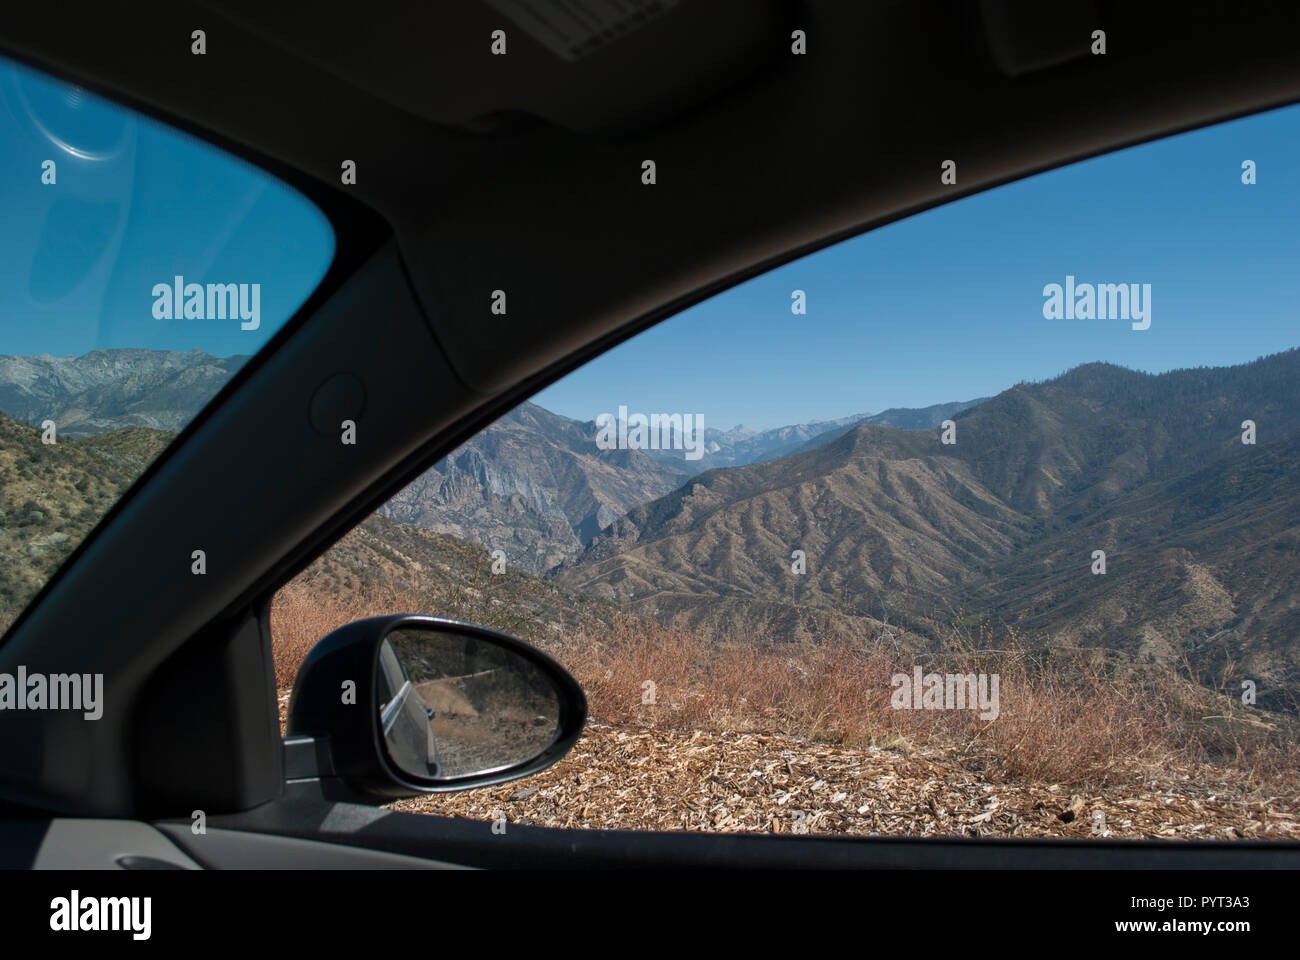 View through the car window at open mountains landscape Stock Photo